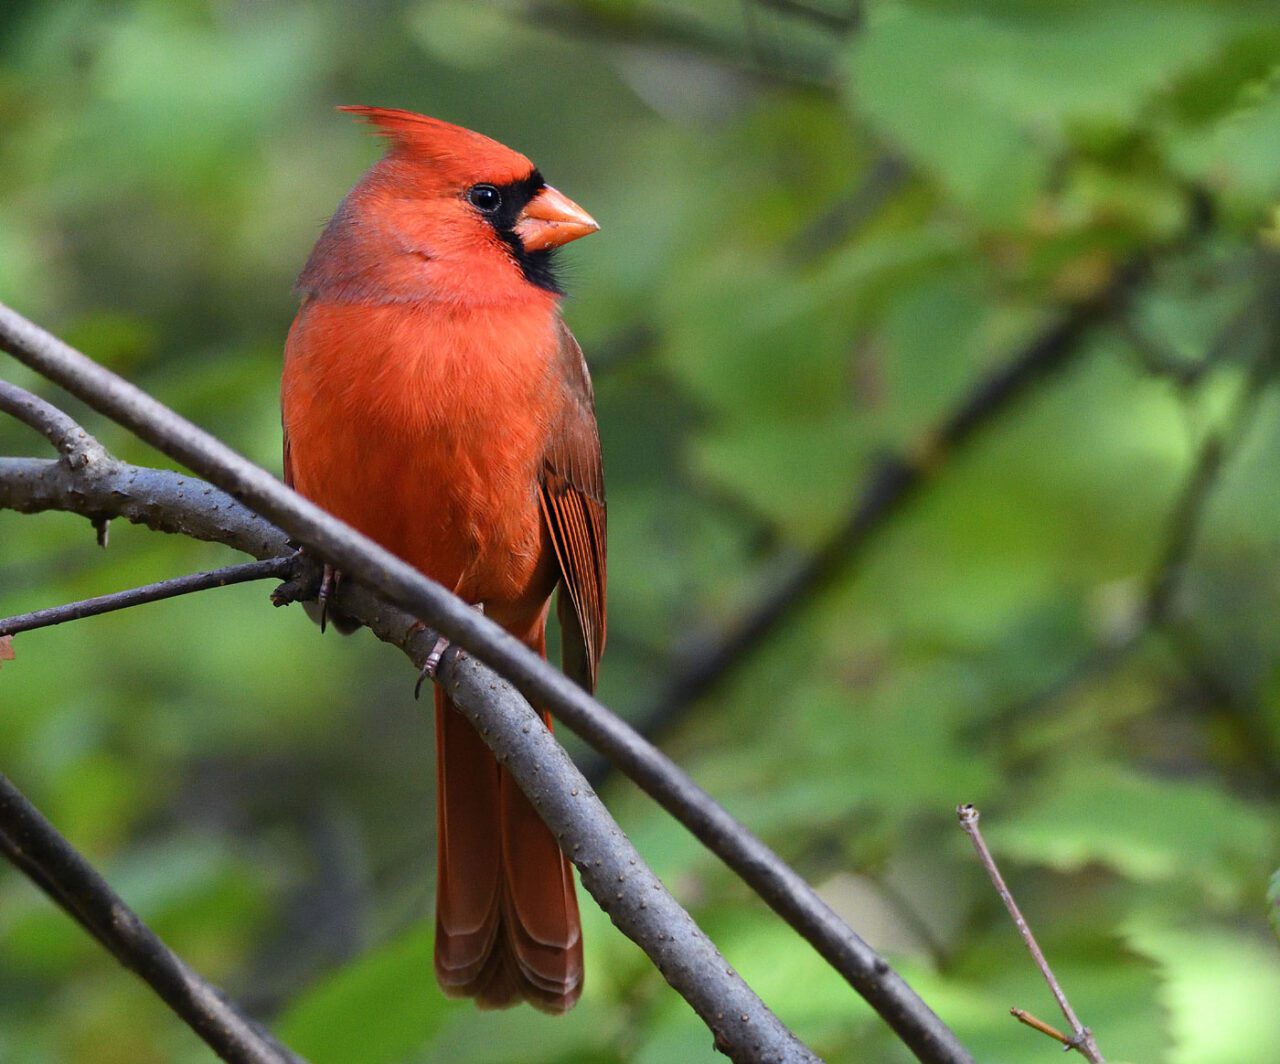 A bright red bird with a red crest, conical red bill and black face mask, perches on a branch.